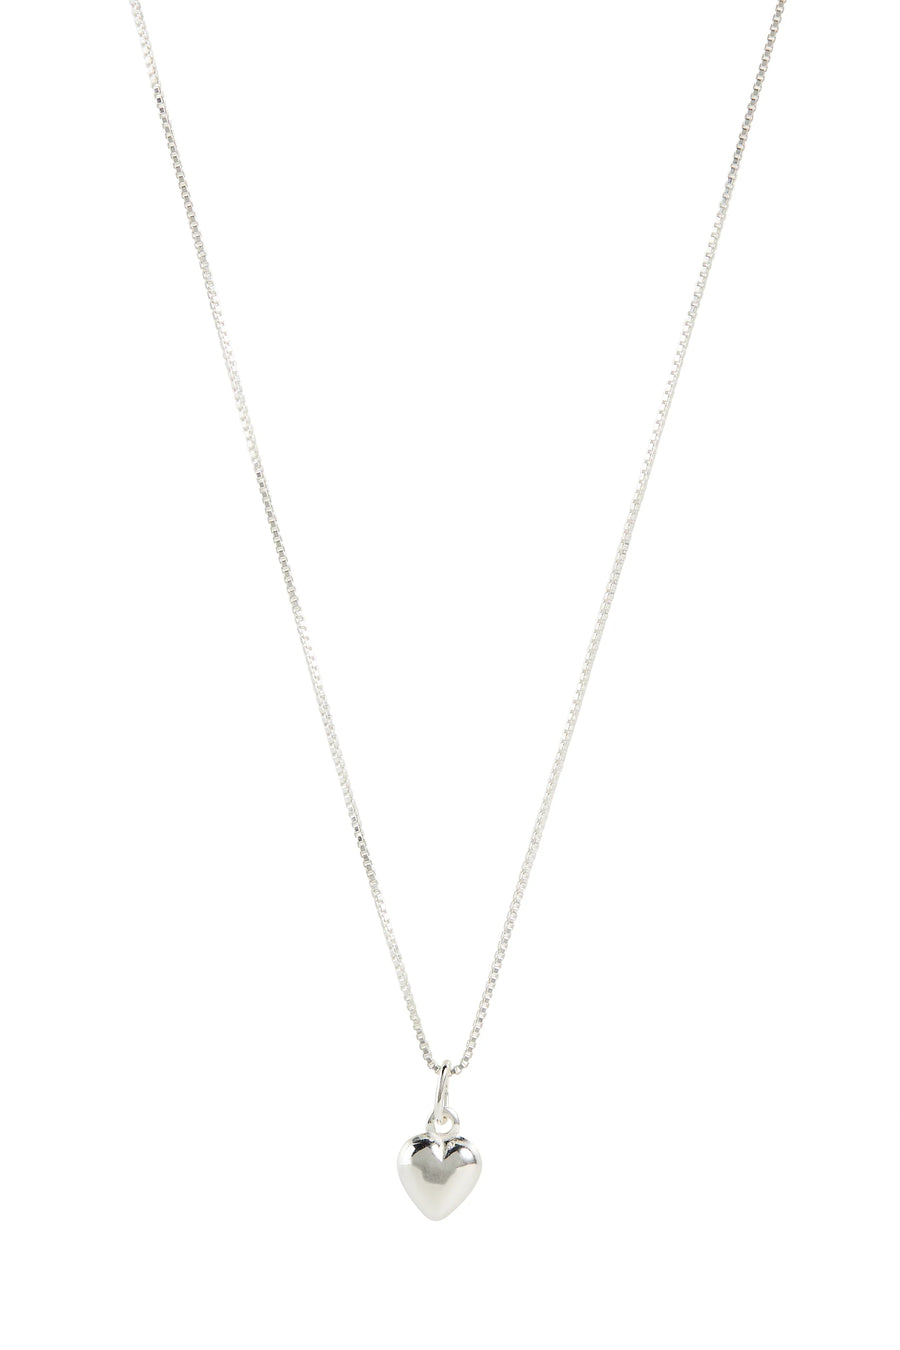 LISBETH JEWELRY - FLORENCE NECKLACE - SILVER